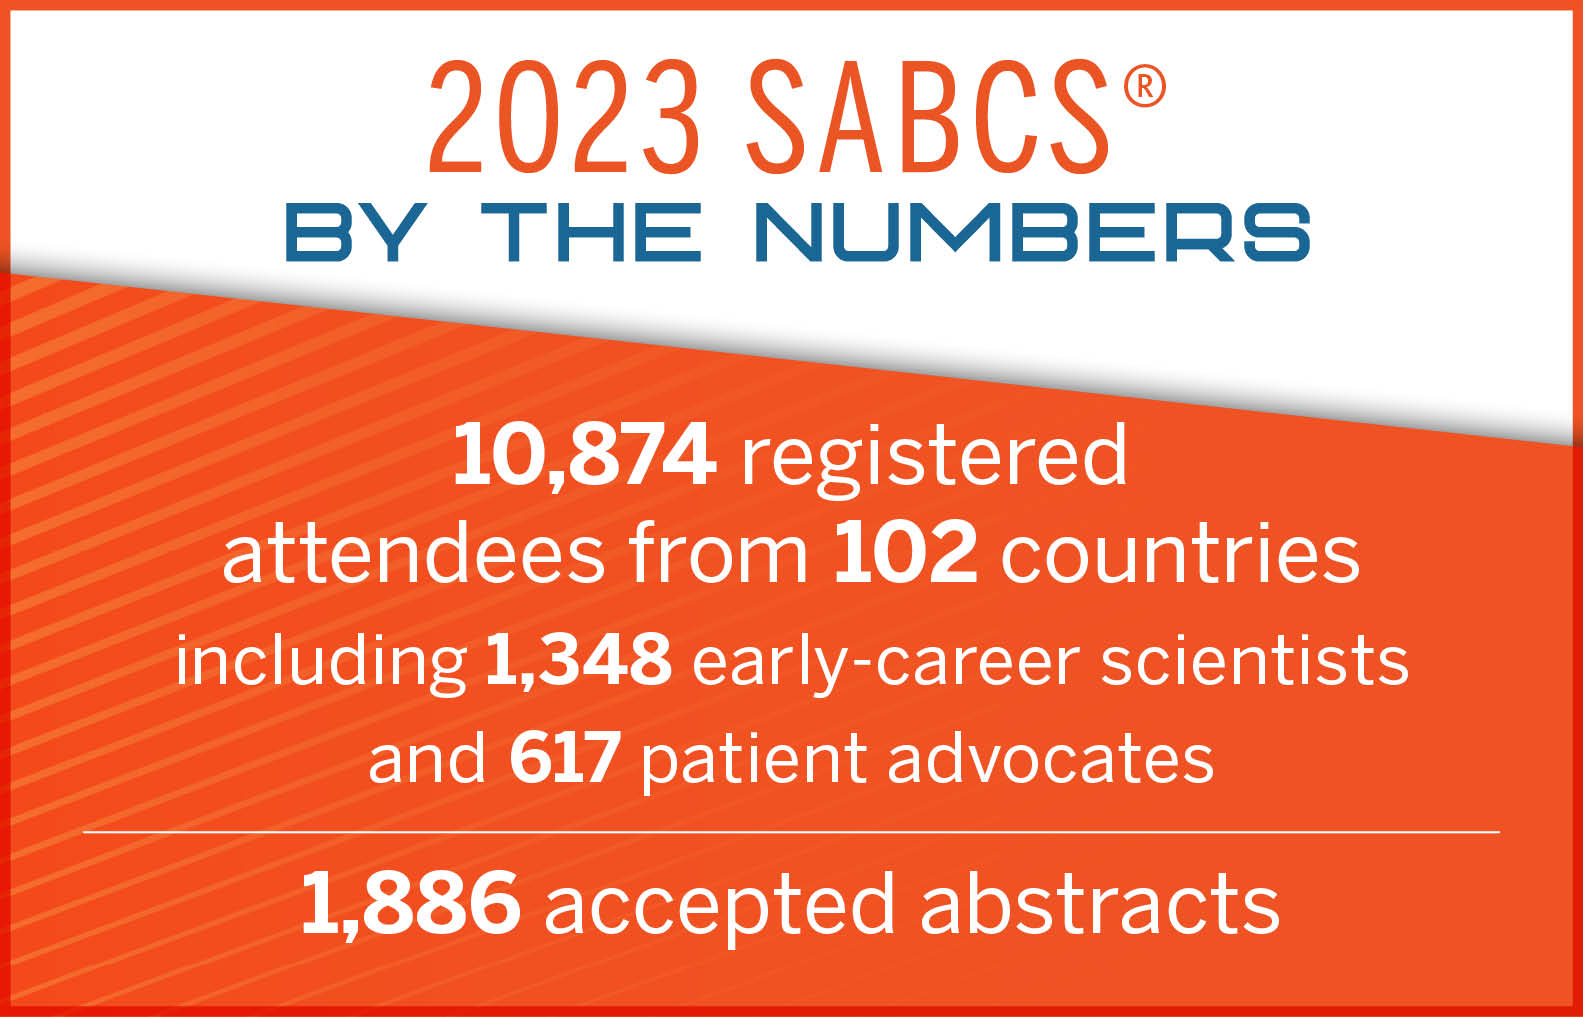 Thank you for making the 2023 SABCS® a success